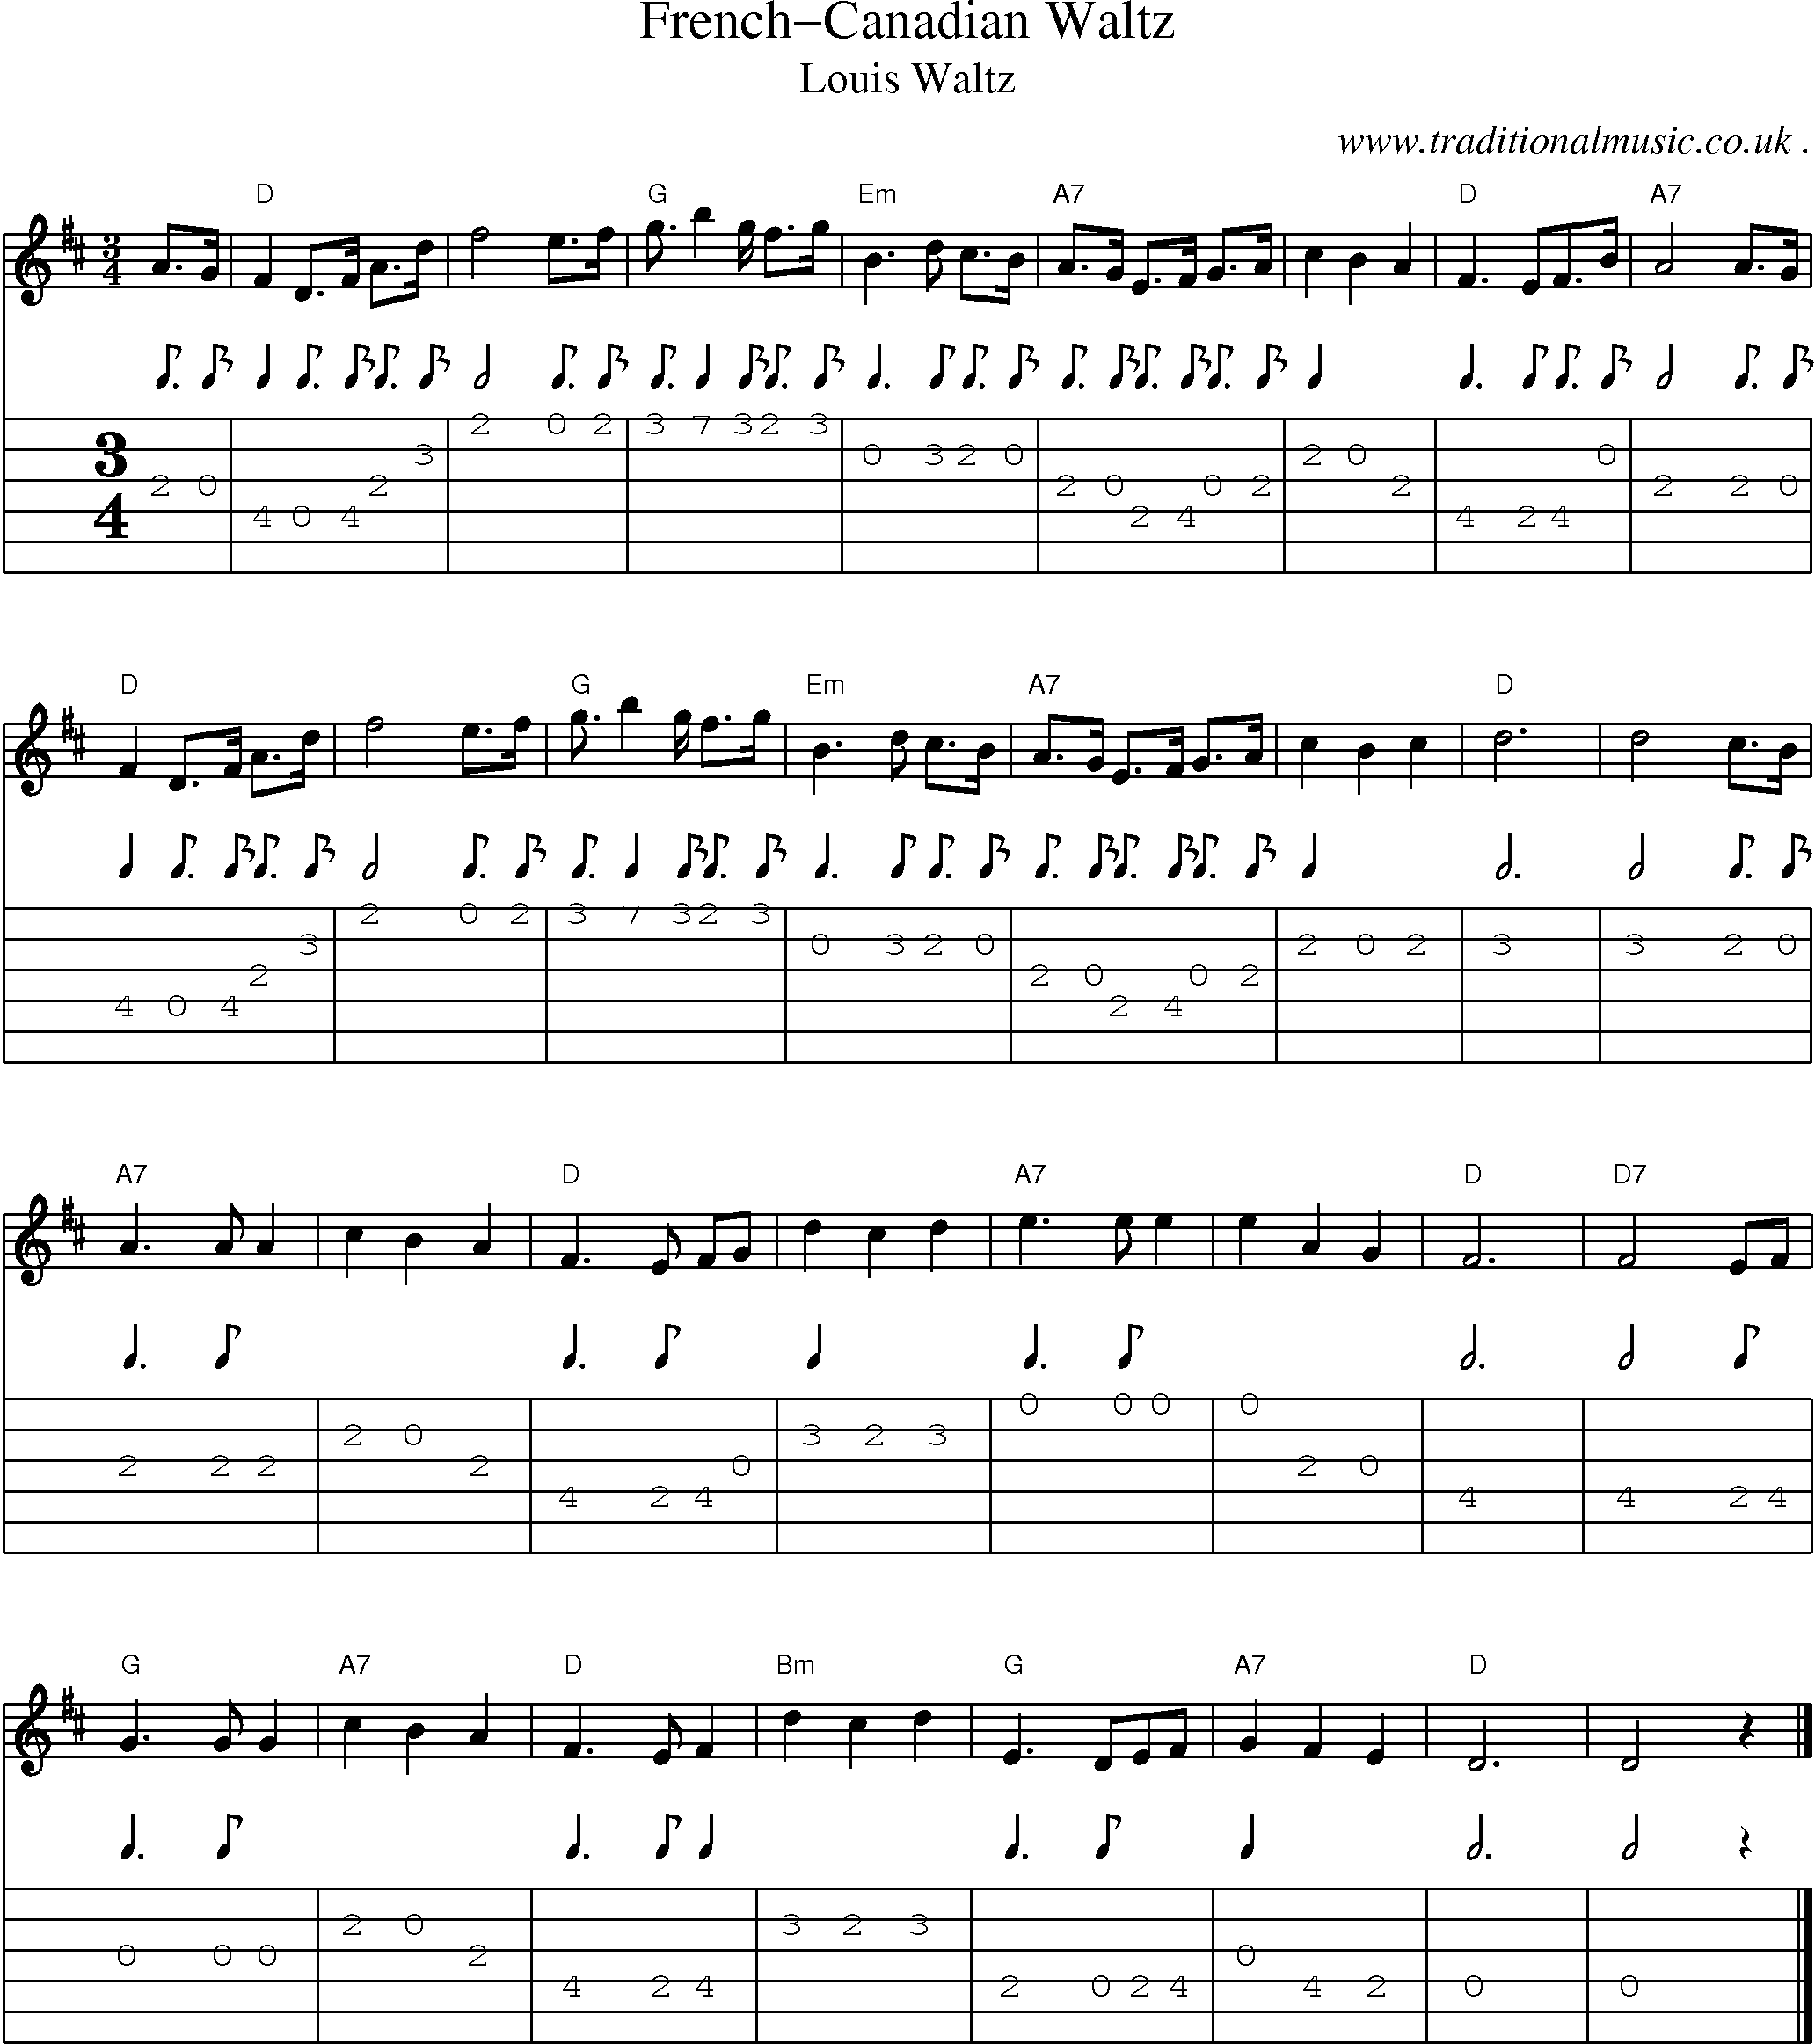 Music Score and Guitar Tabs for French-Canadian Waltz